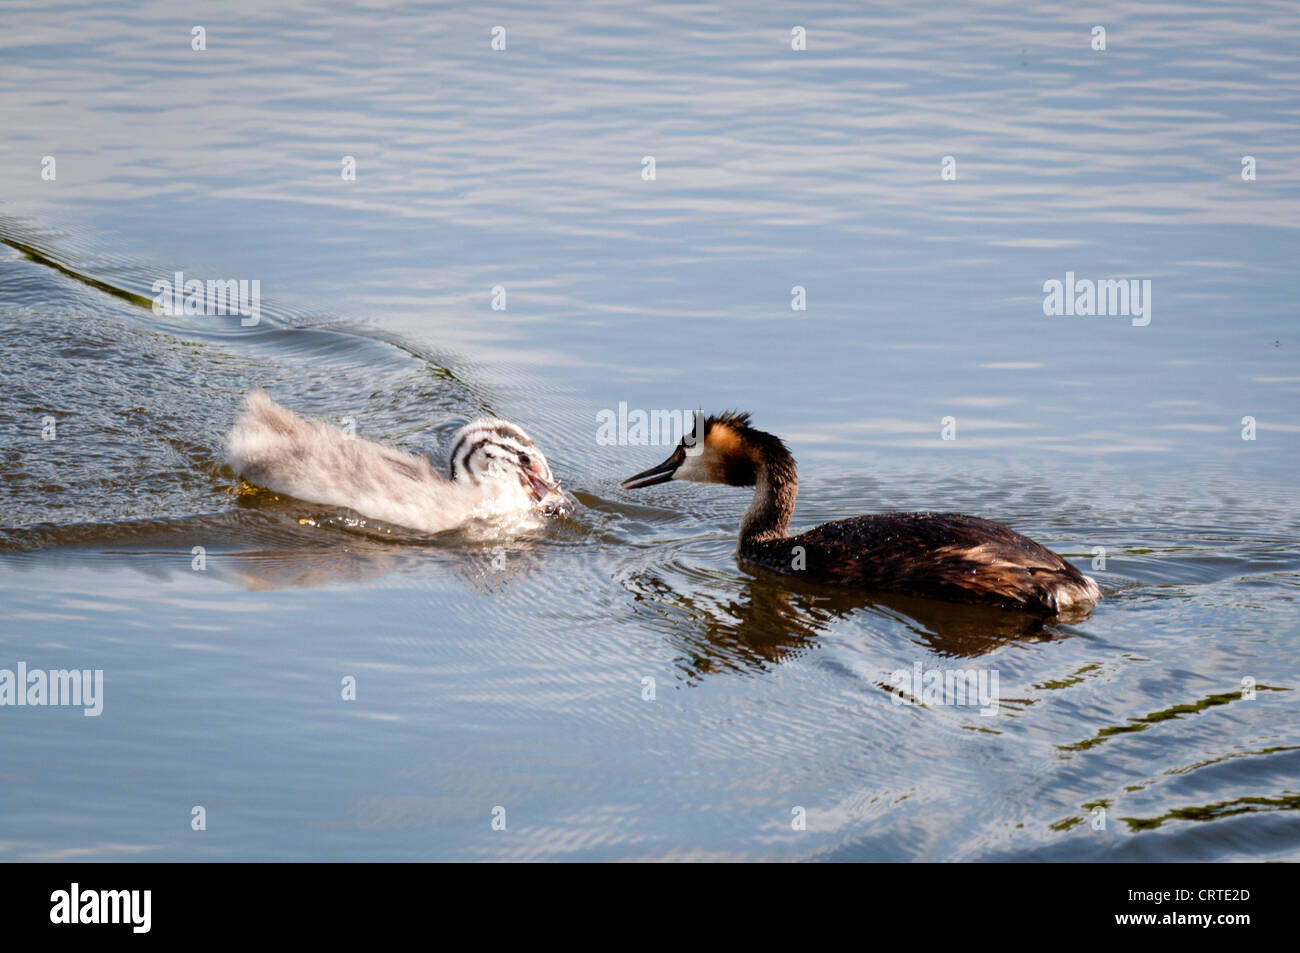 Adult and juvenile Great Crested Grebe (Podiceps cristatus) Stock Photo